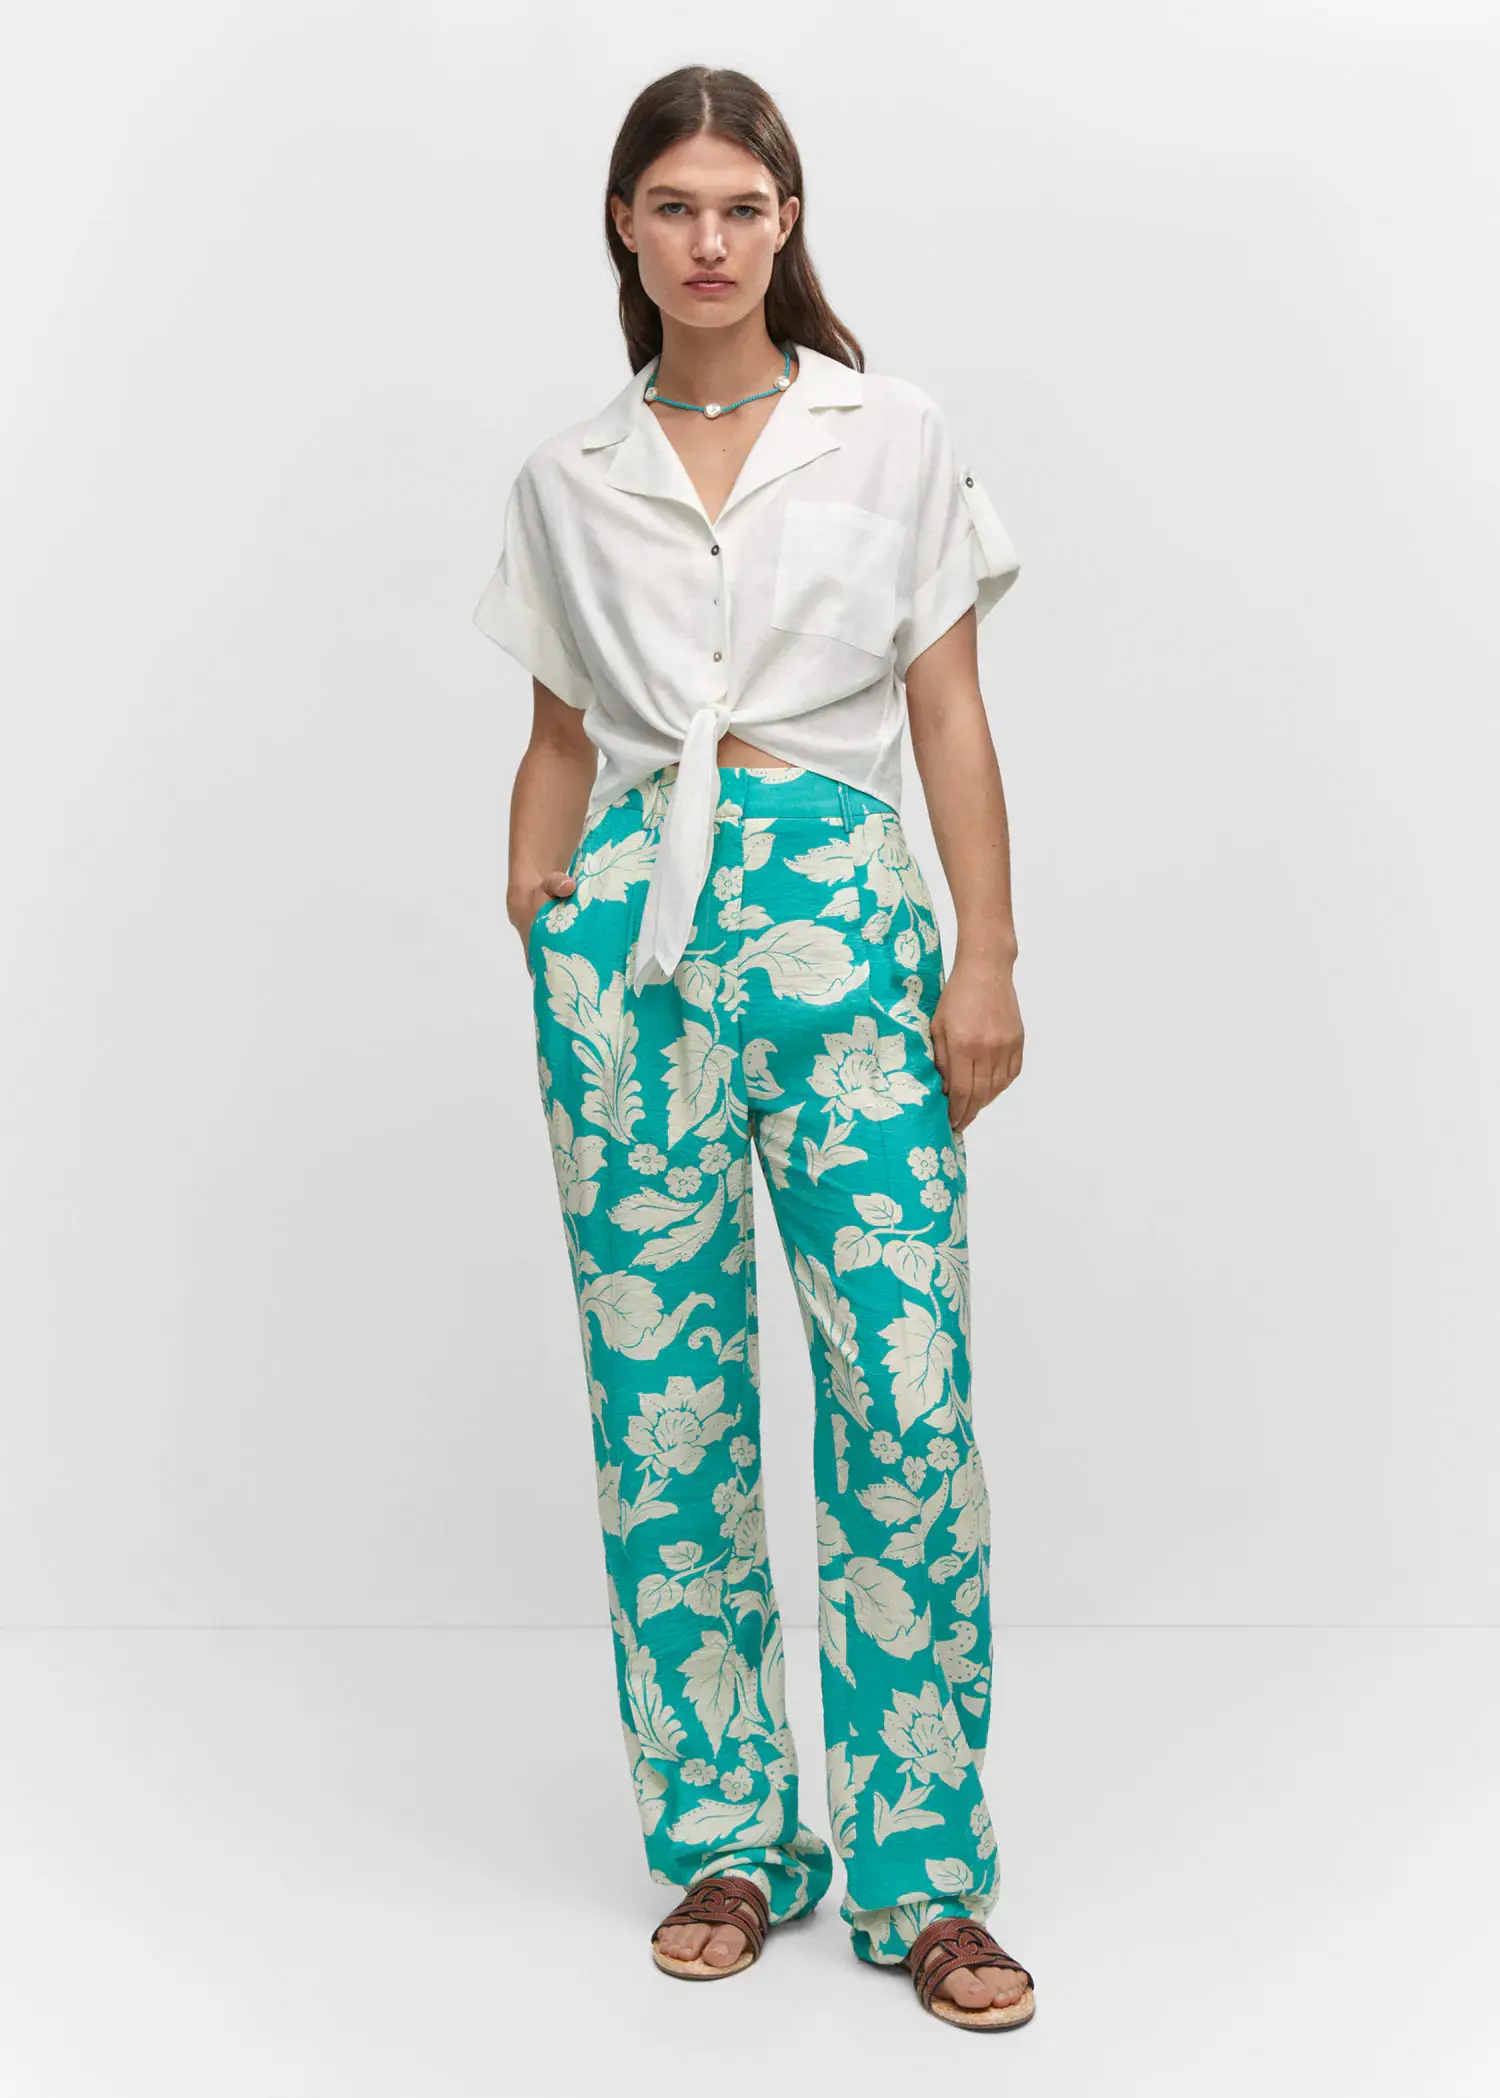 Mango Printed straight pants. a person standing wearing a white shirt and green pants. 